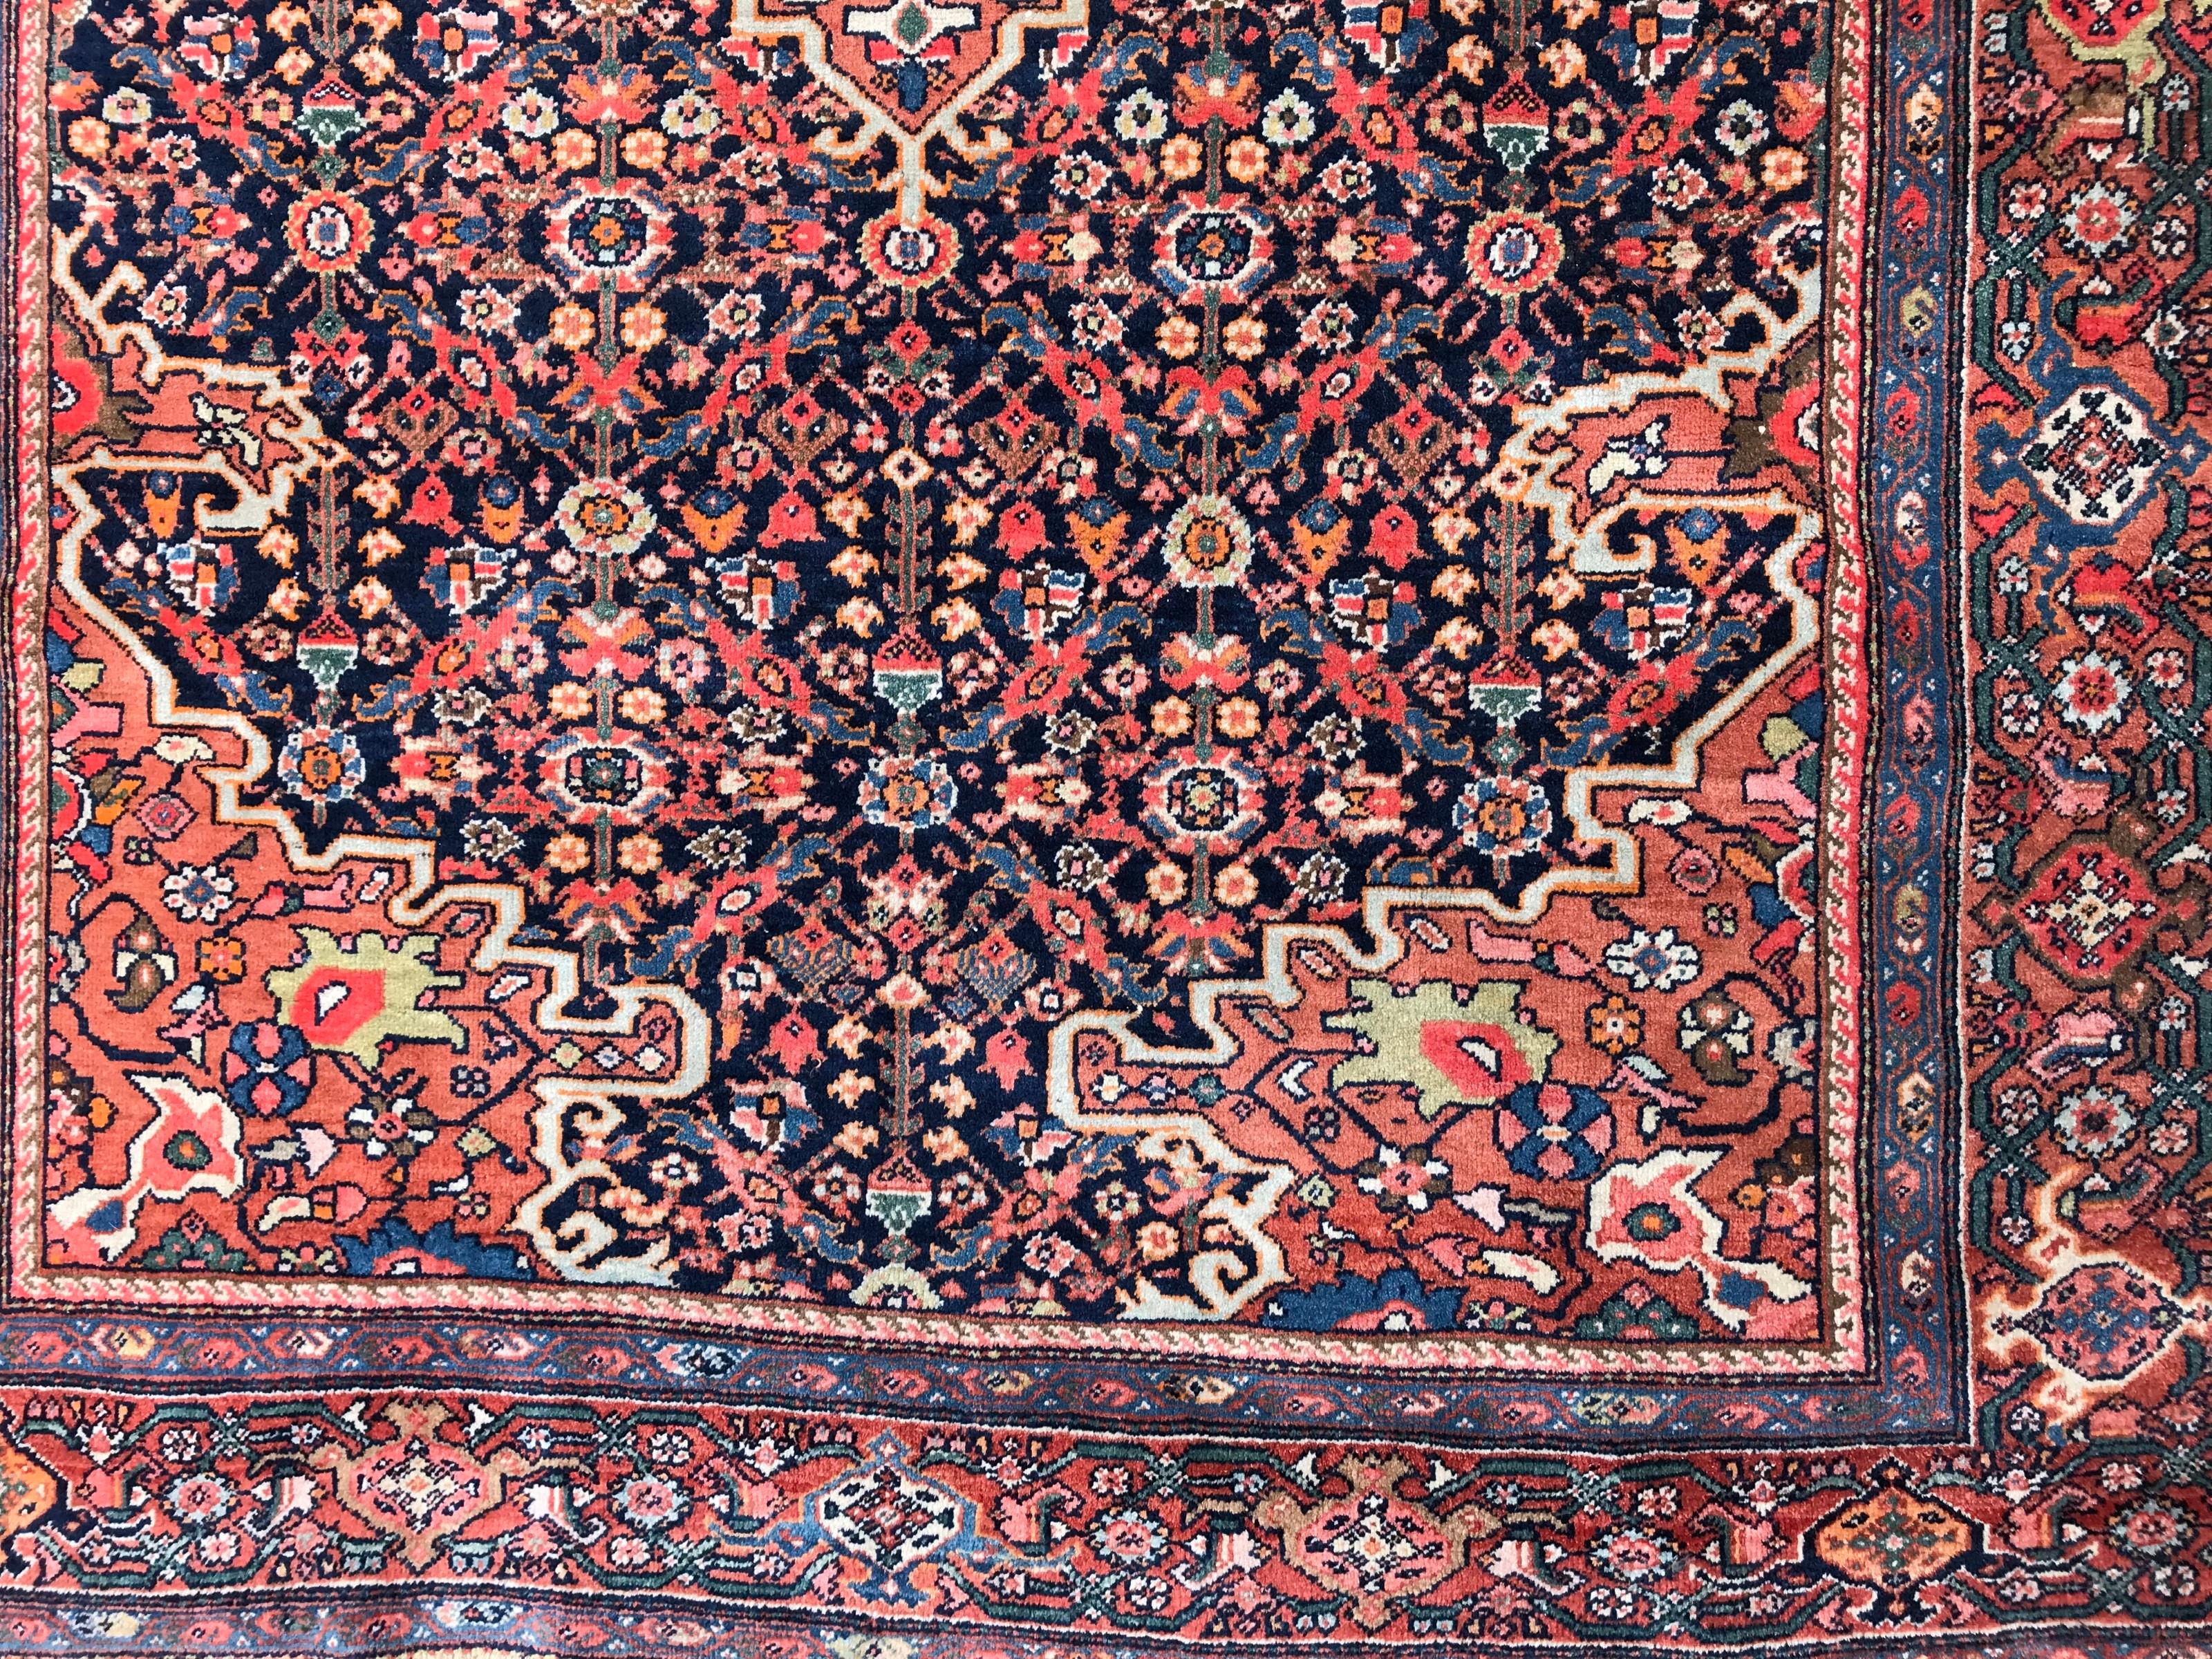 Very beautiful antique rug with nice Herti design and natural colors with blue, red, dark blue, orange, pink, yellow and green, finely and entirely hand knotted with velvet on cotton foundations.

✨✨✨
